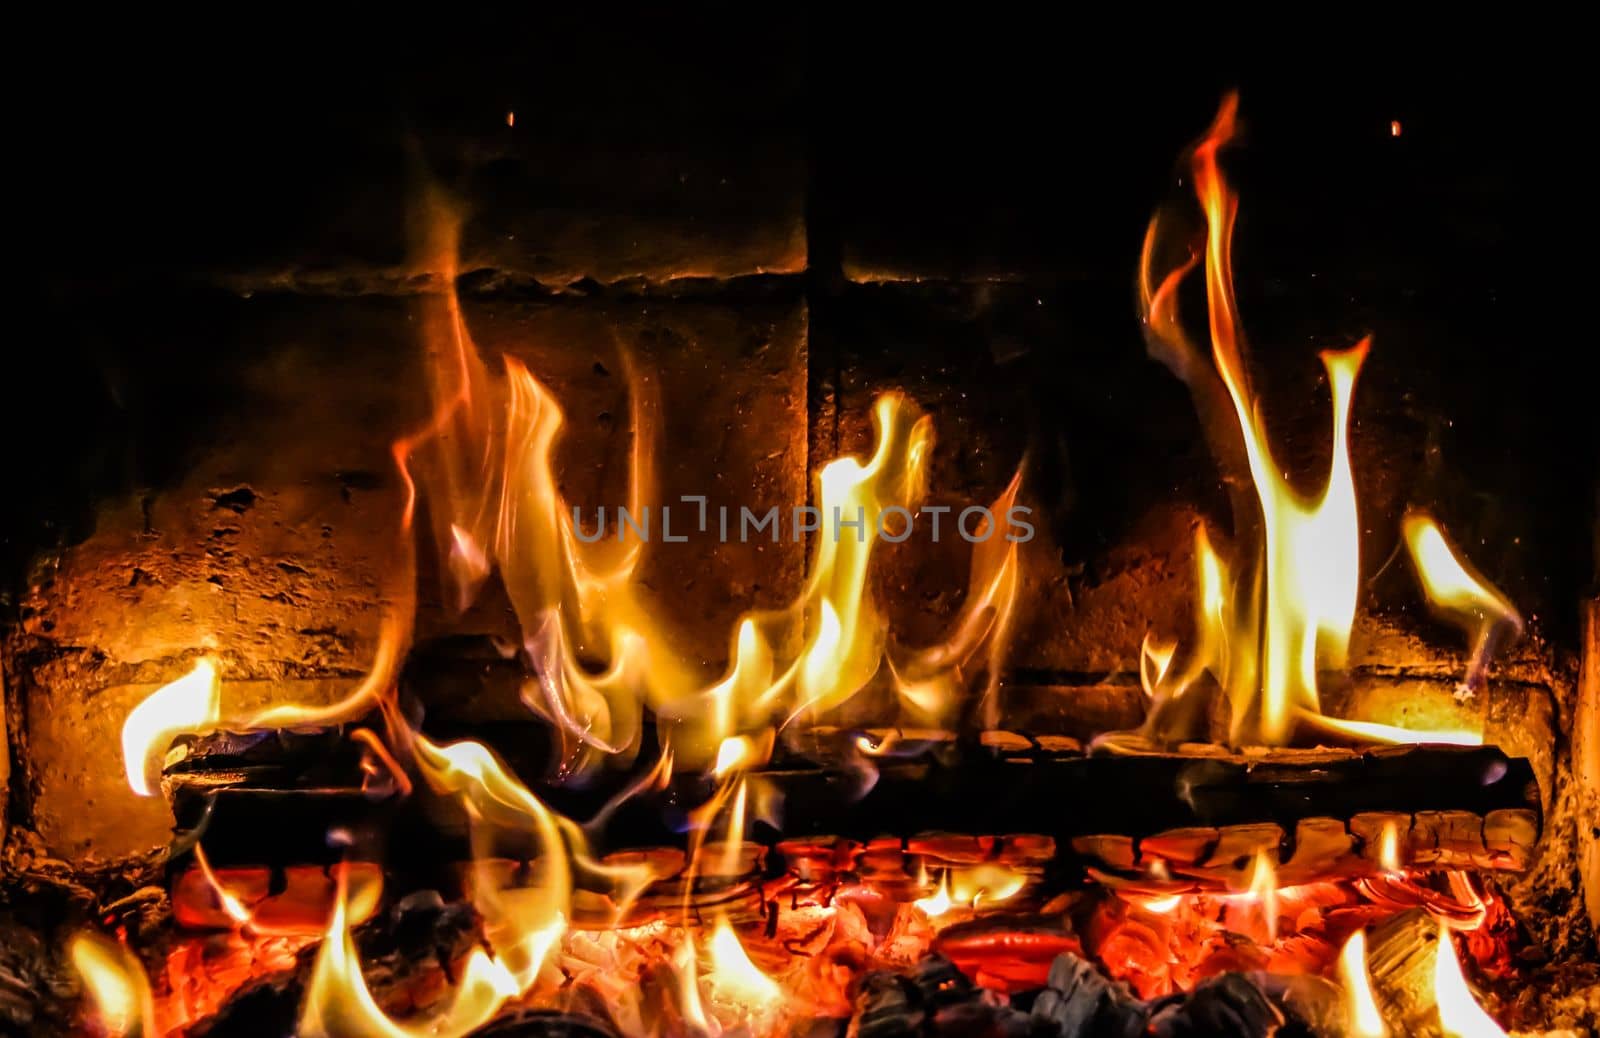 Flames of fire on a black background. Burning wood in the fireplace